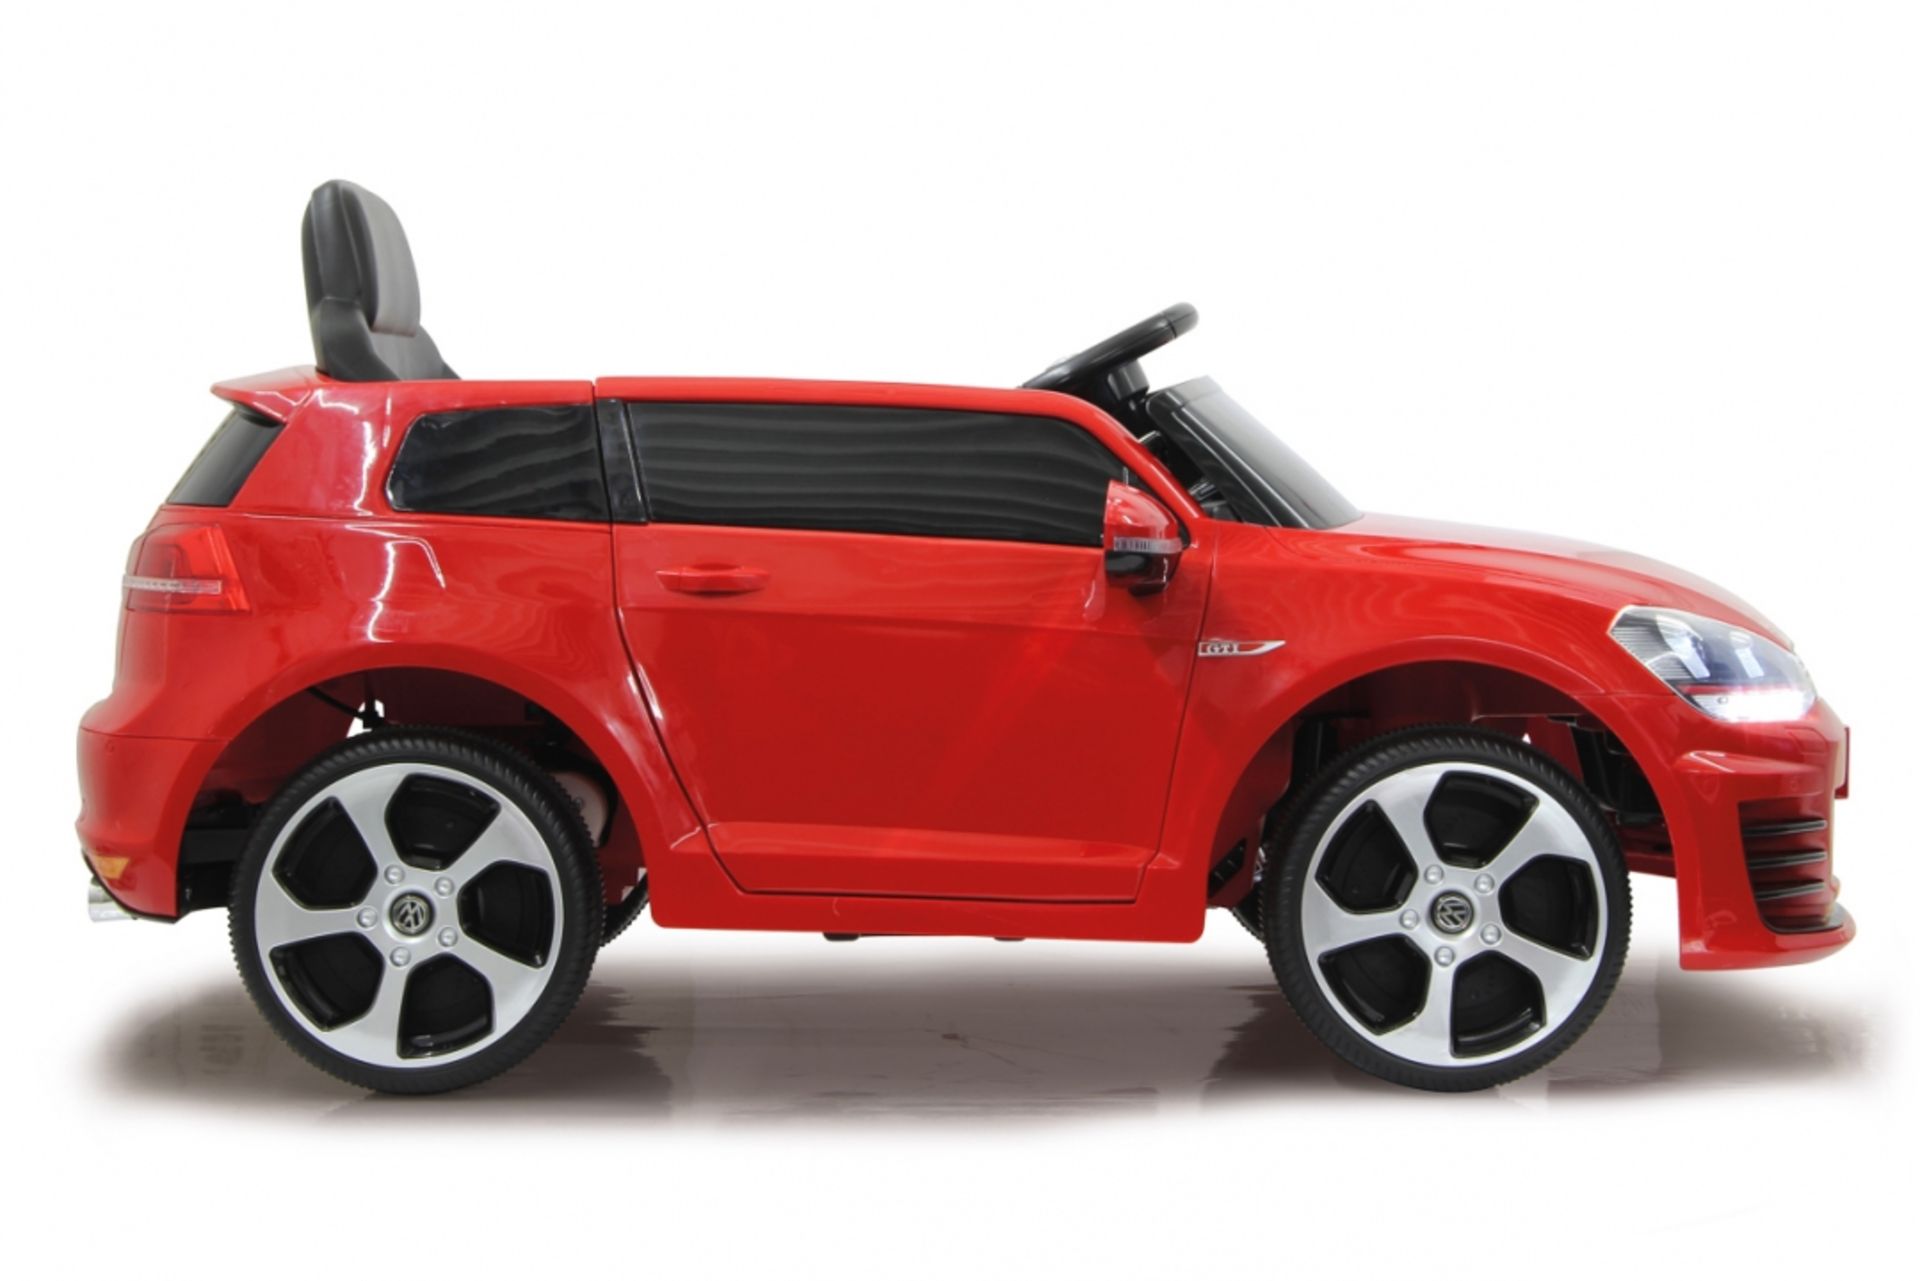 V Brand New Ride In Golf GTi VW Licensed 1:4 Scale Design With 2.4G One-2-One Code Remote Control- - Image 2 of 3